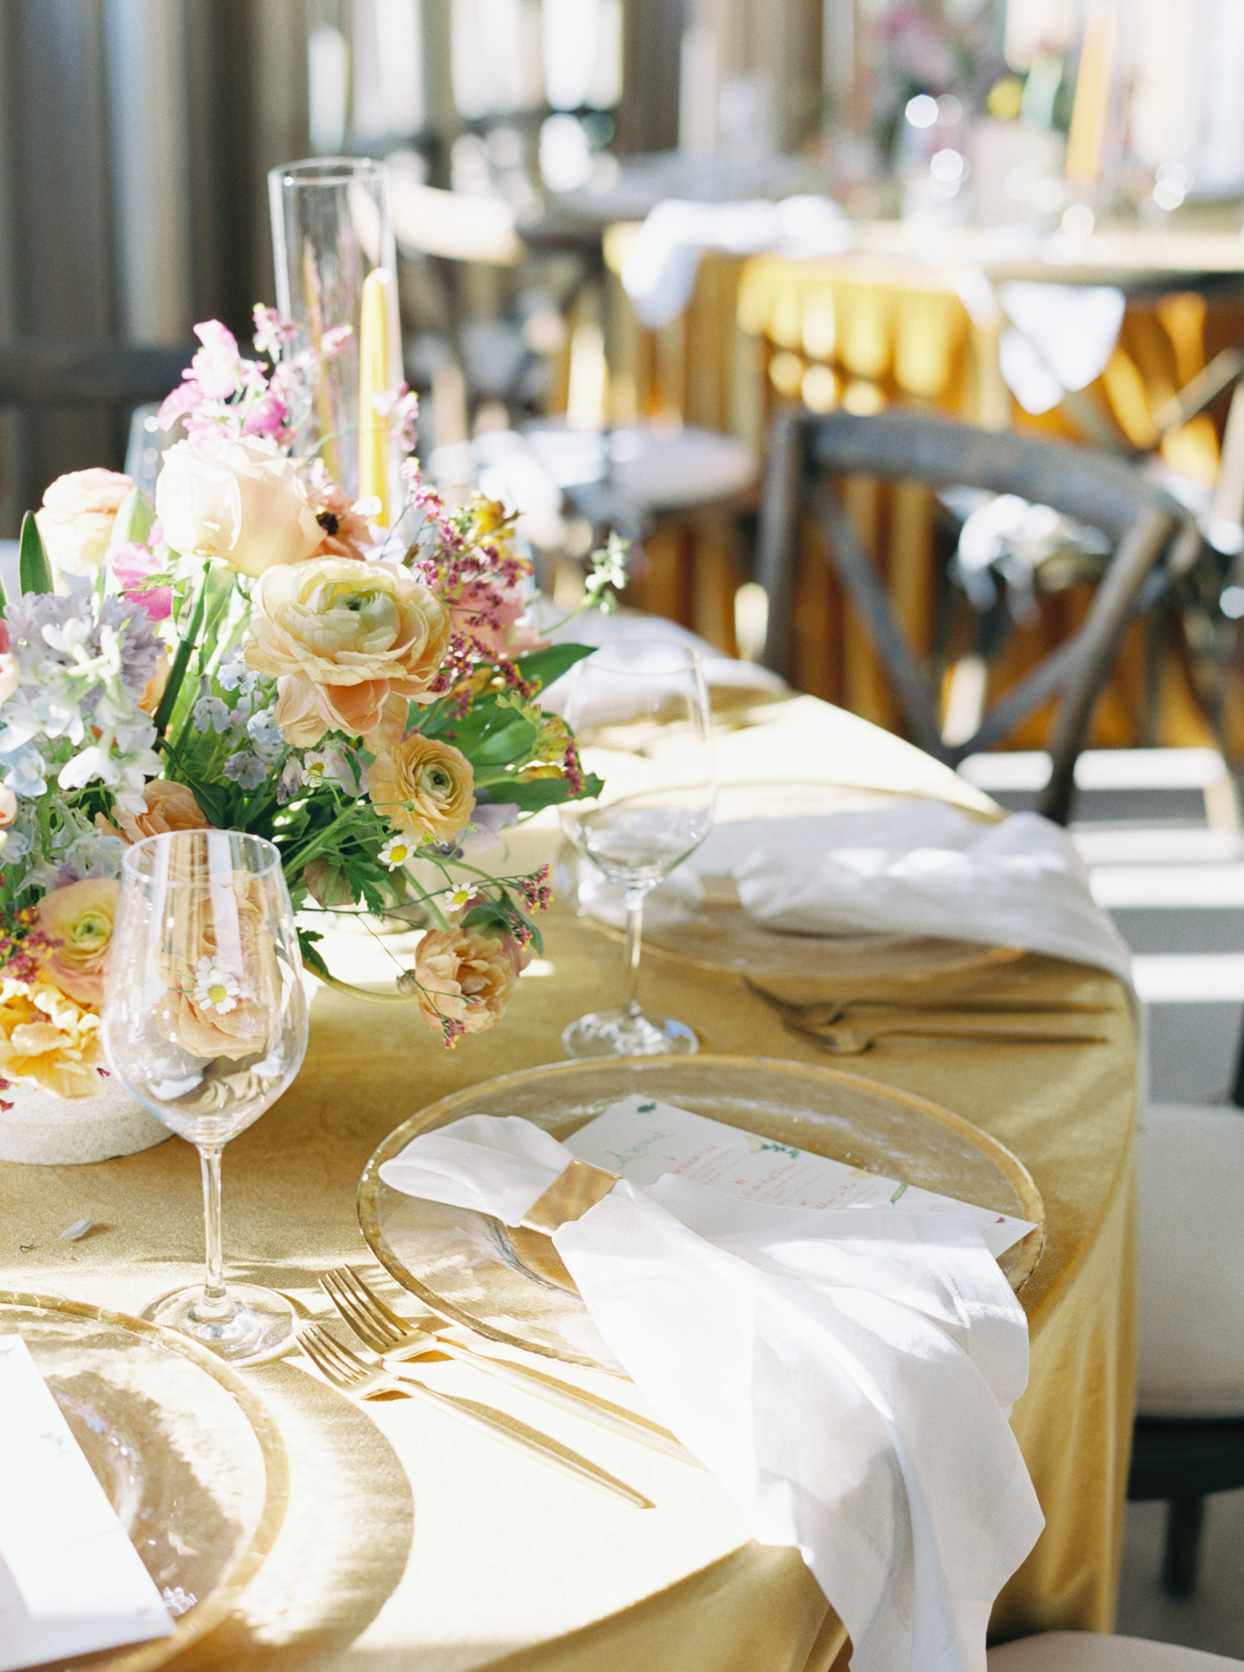 wedding reception place setting with gold flatware and beaded-edge chargers